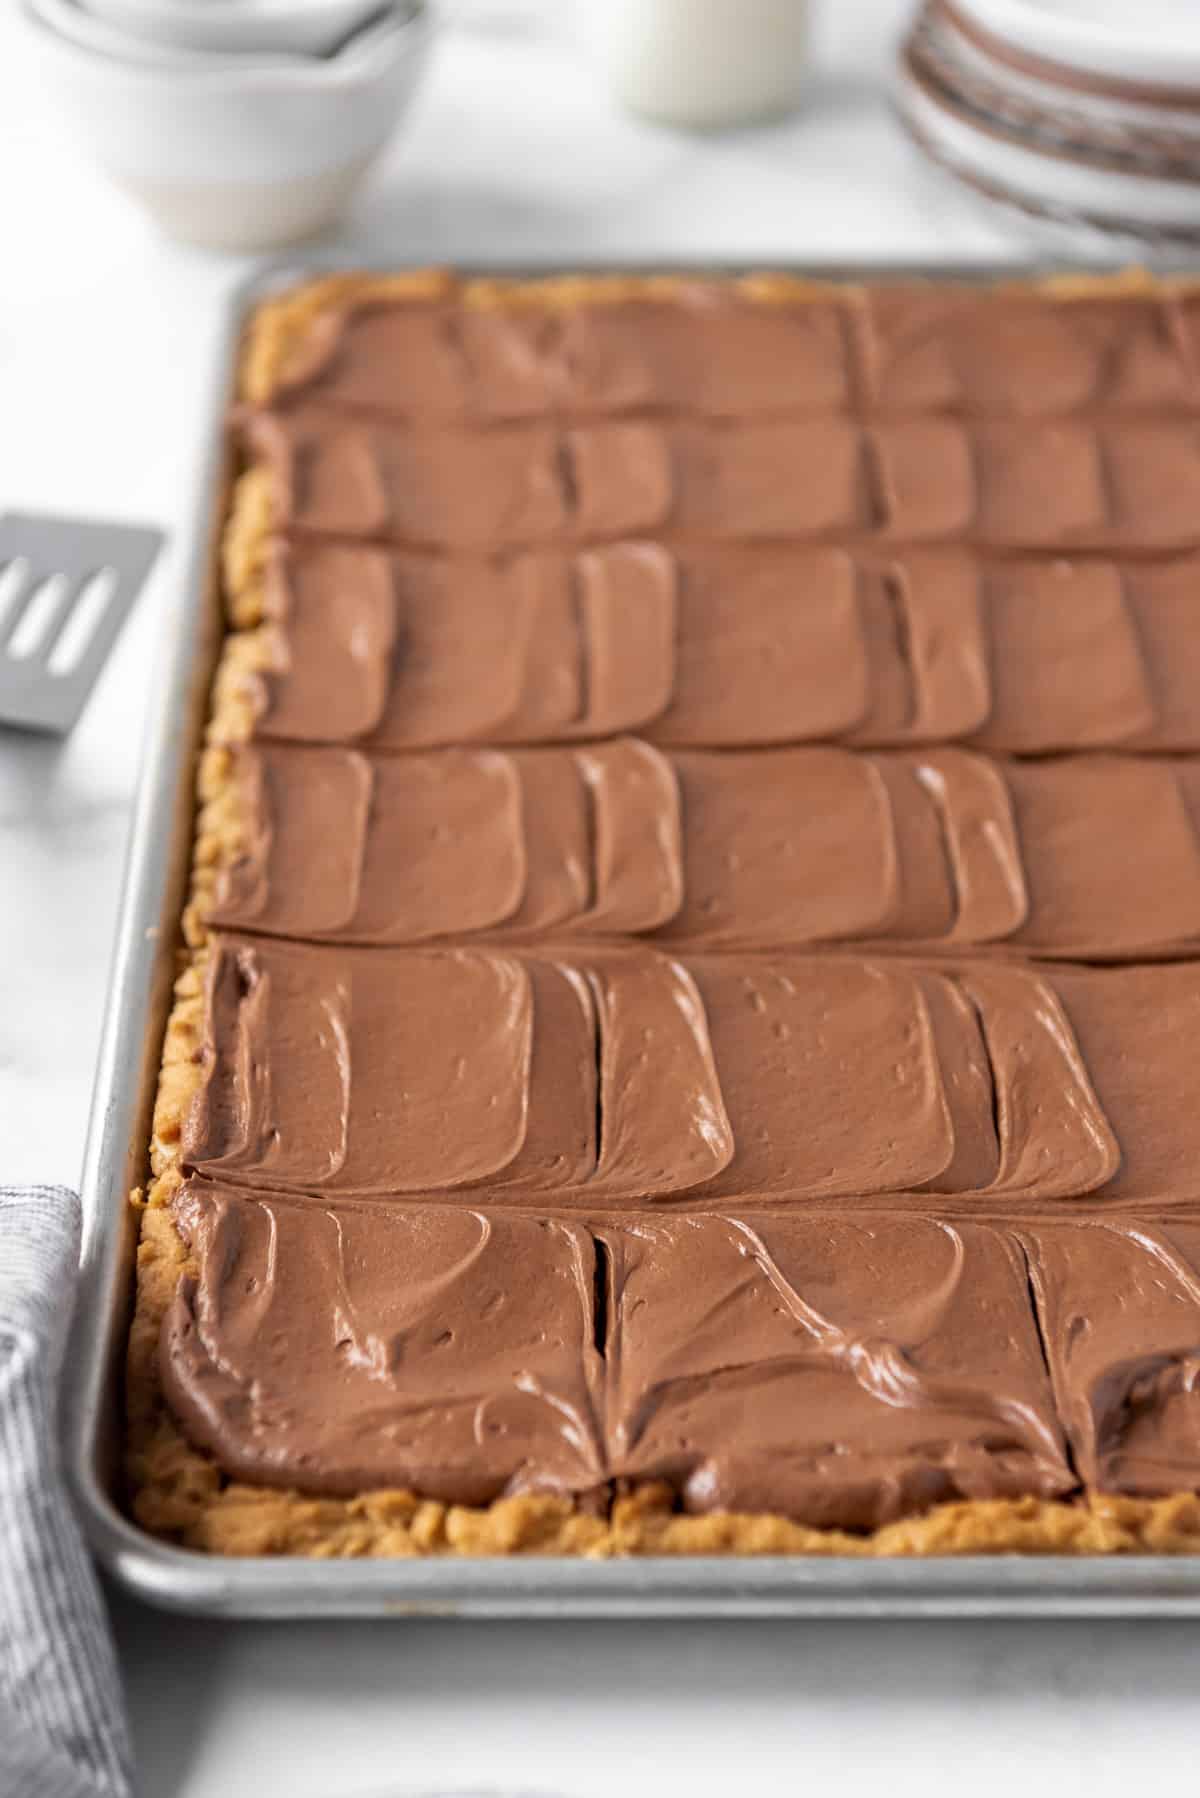 A large rimmed baking sheet with chocolate frosted peanut butter bars on it.